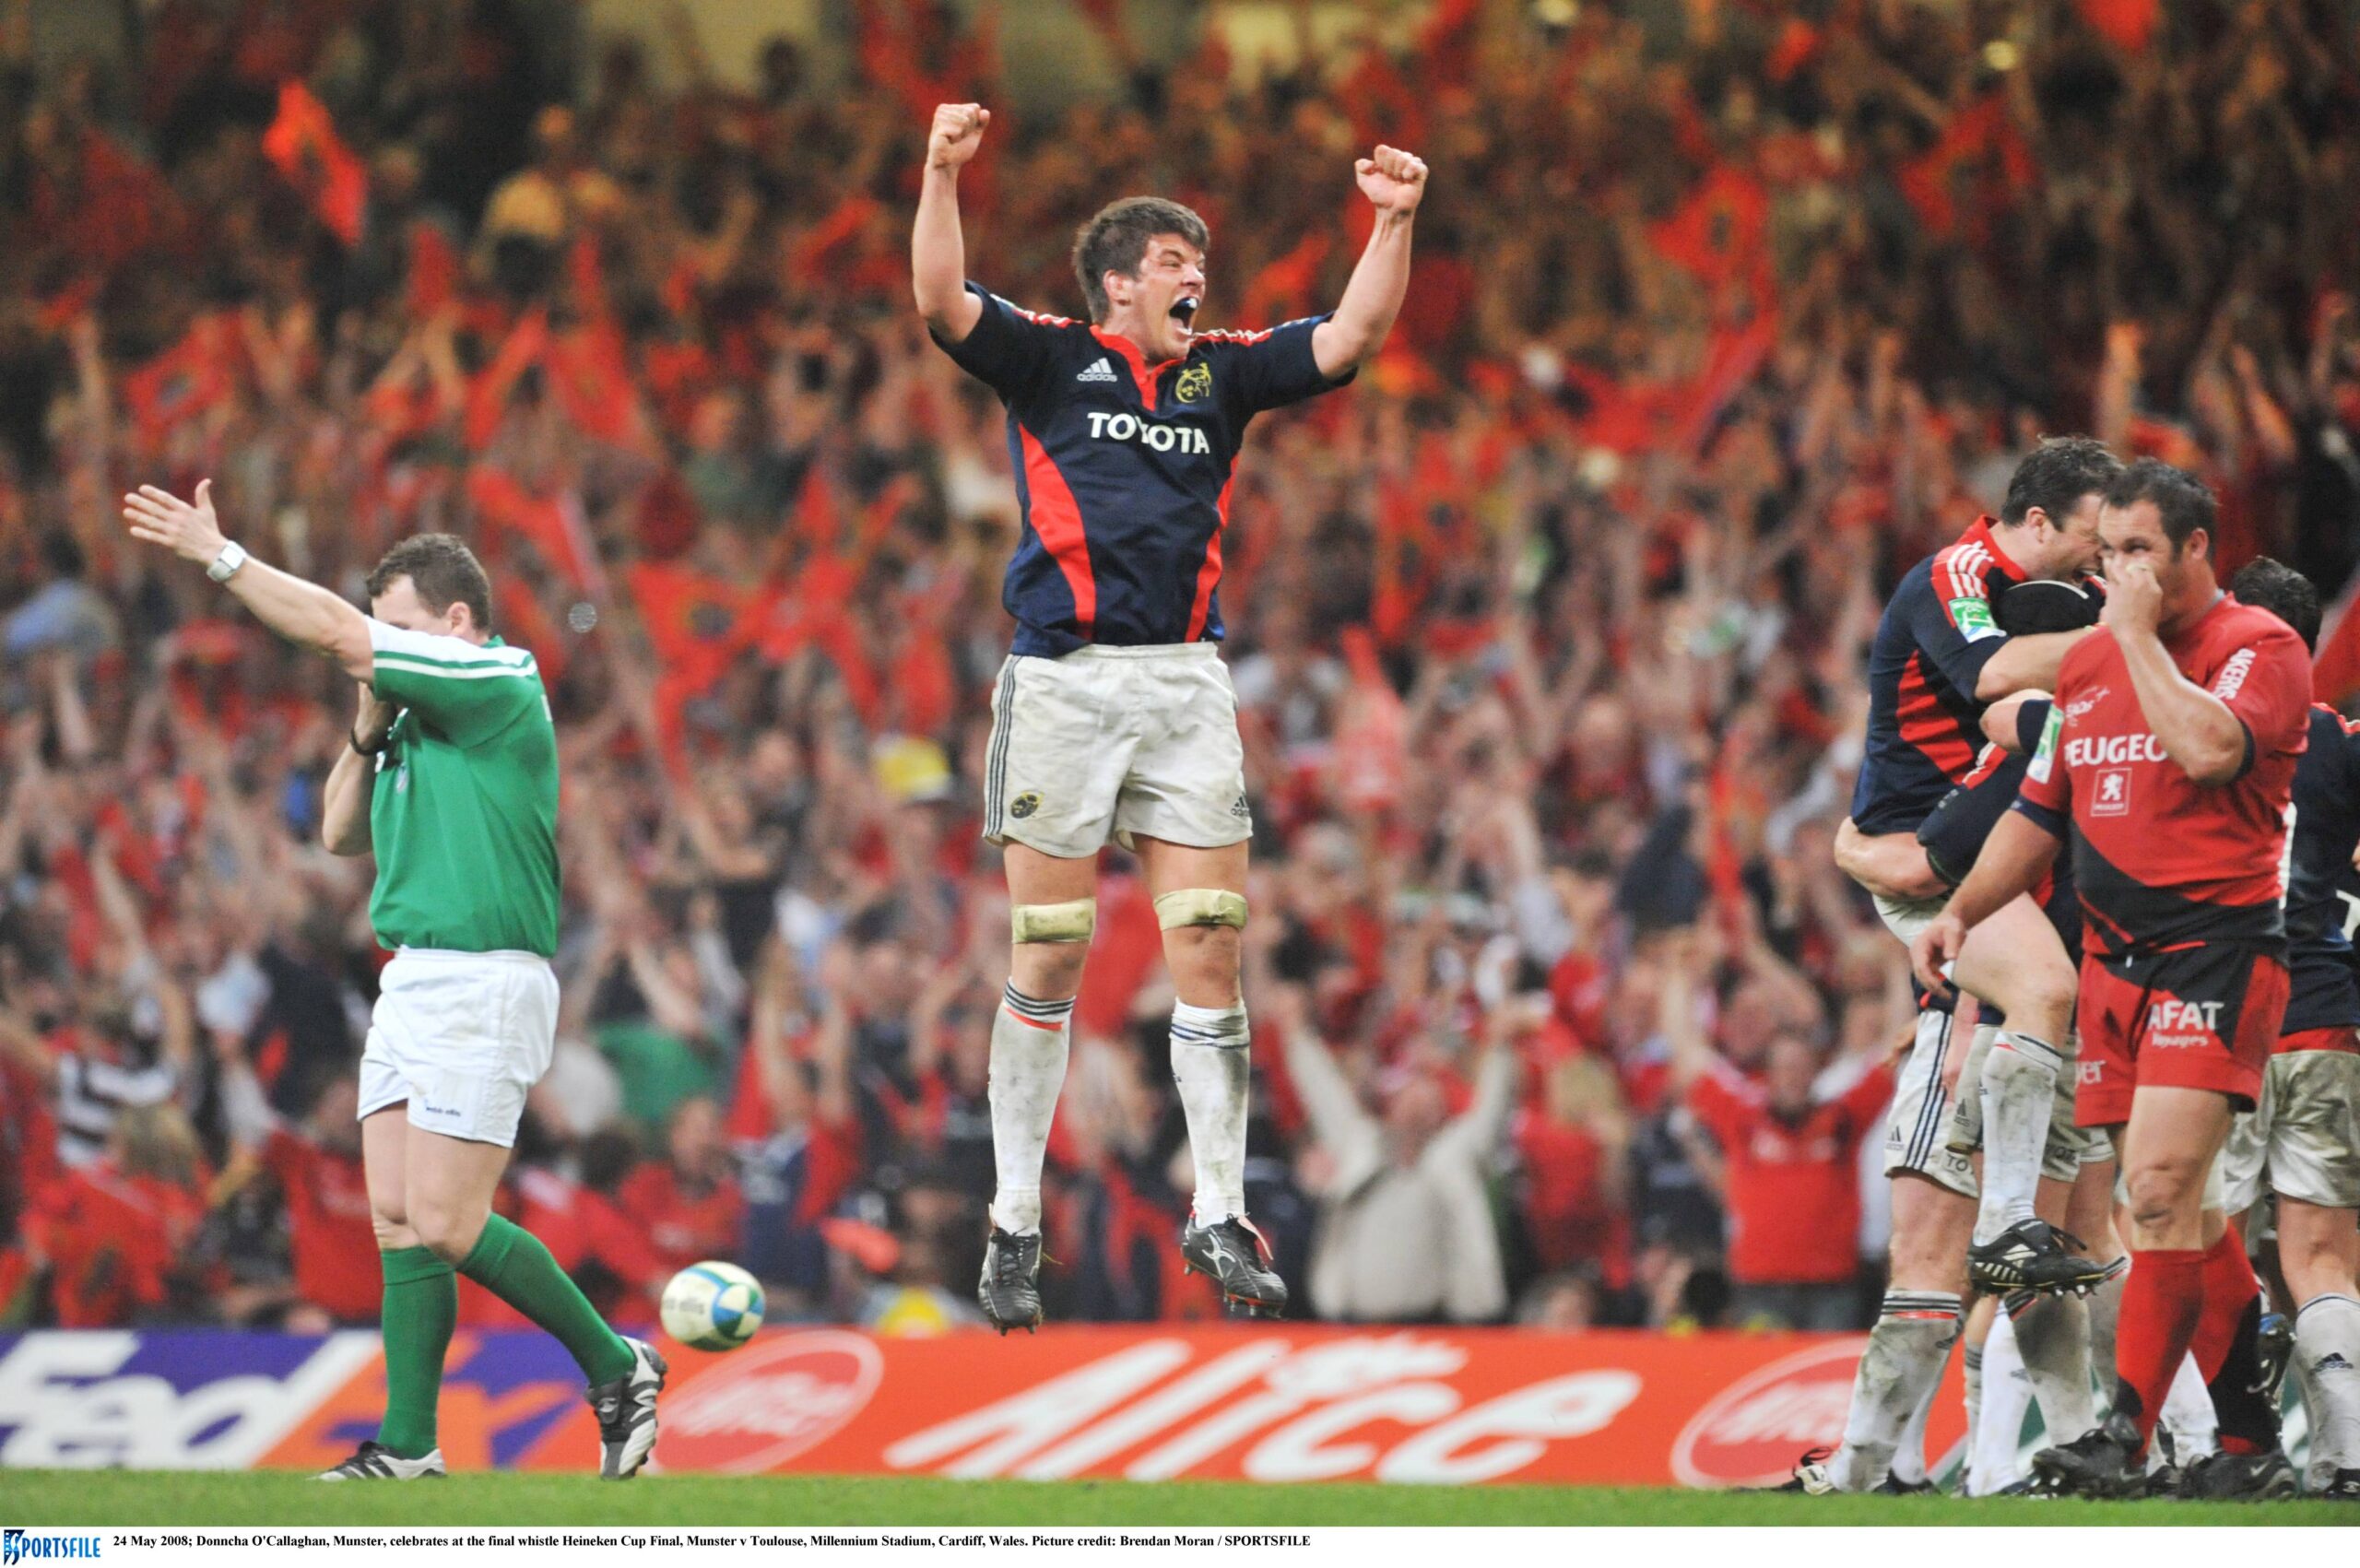 REWATCH 2008 Heineken Cup Final as Munster take on Toulouse